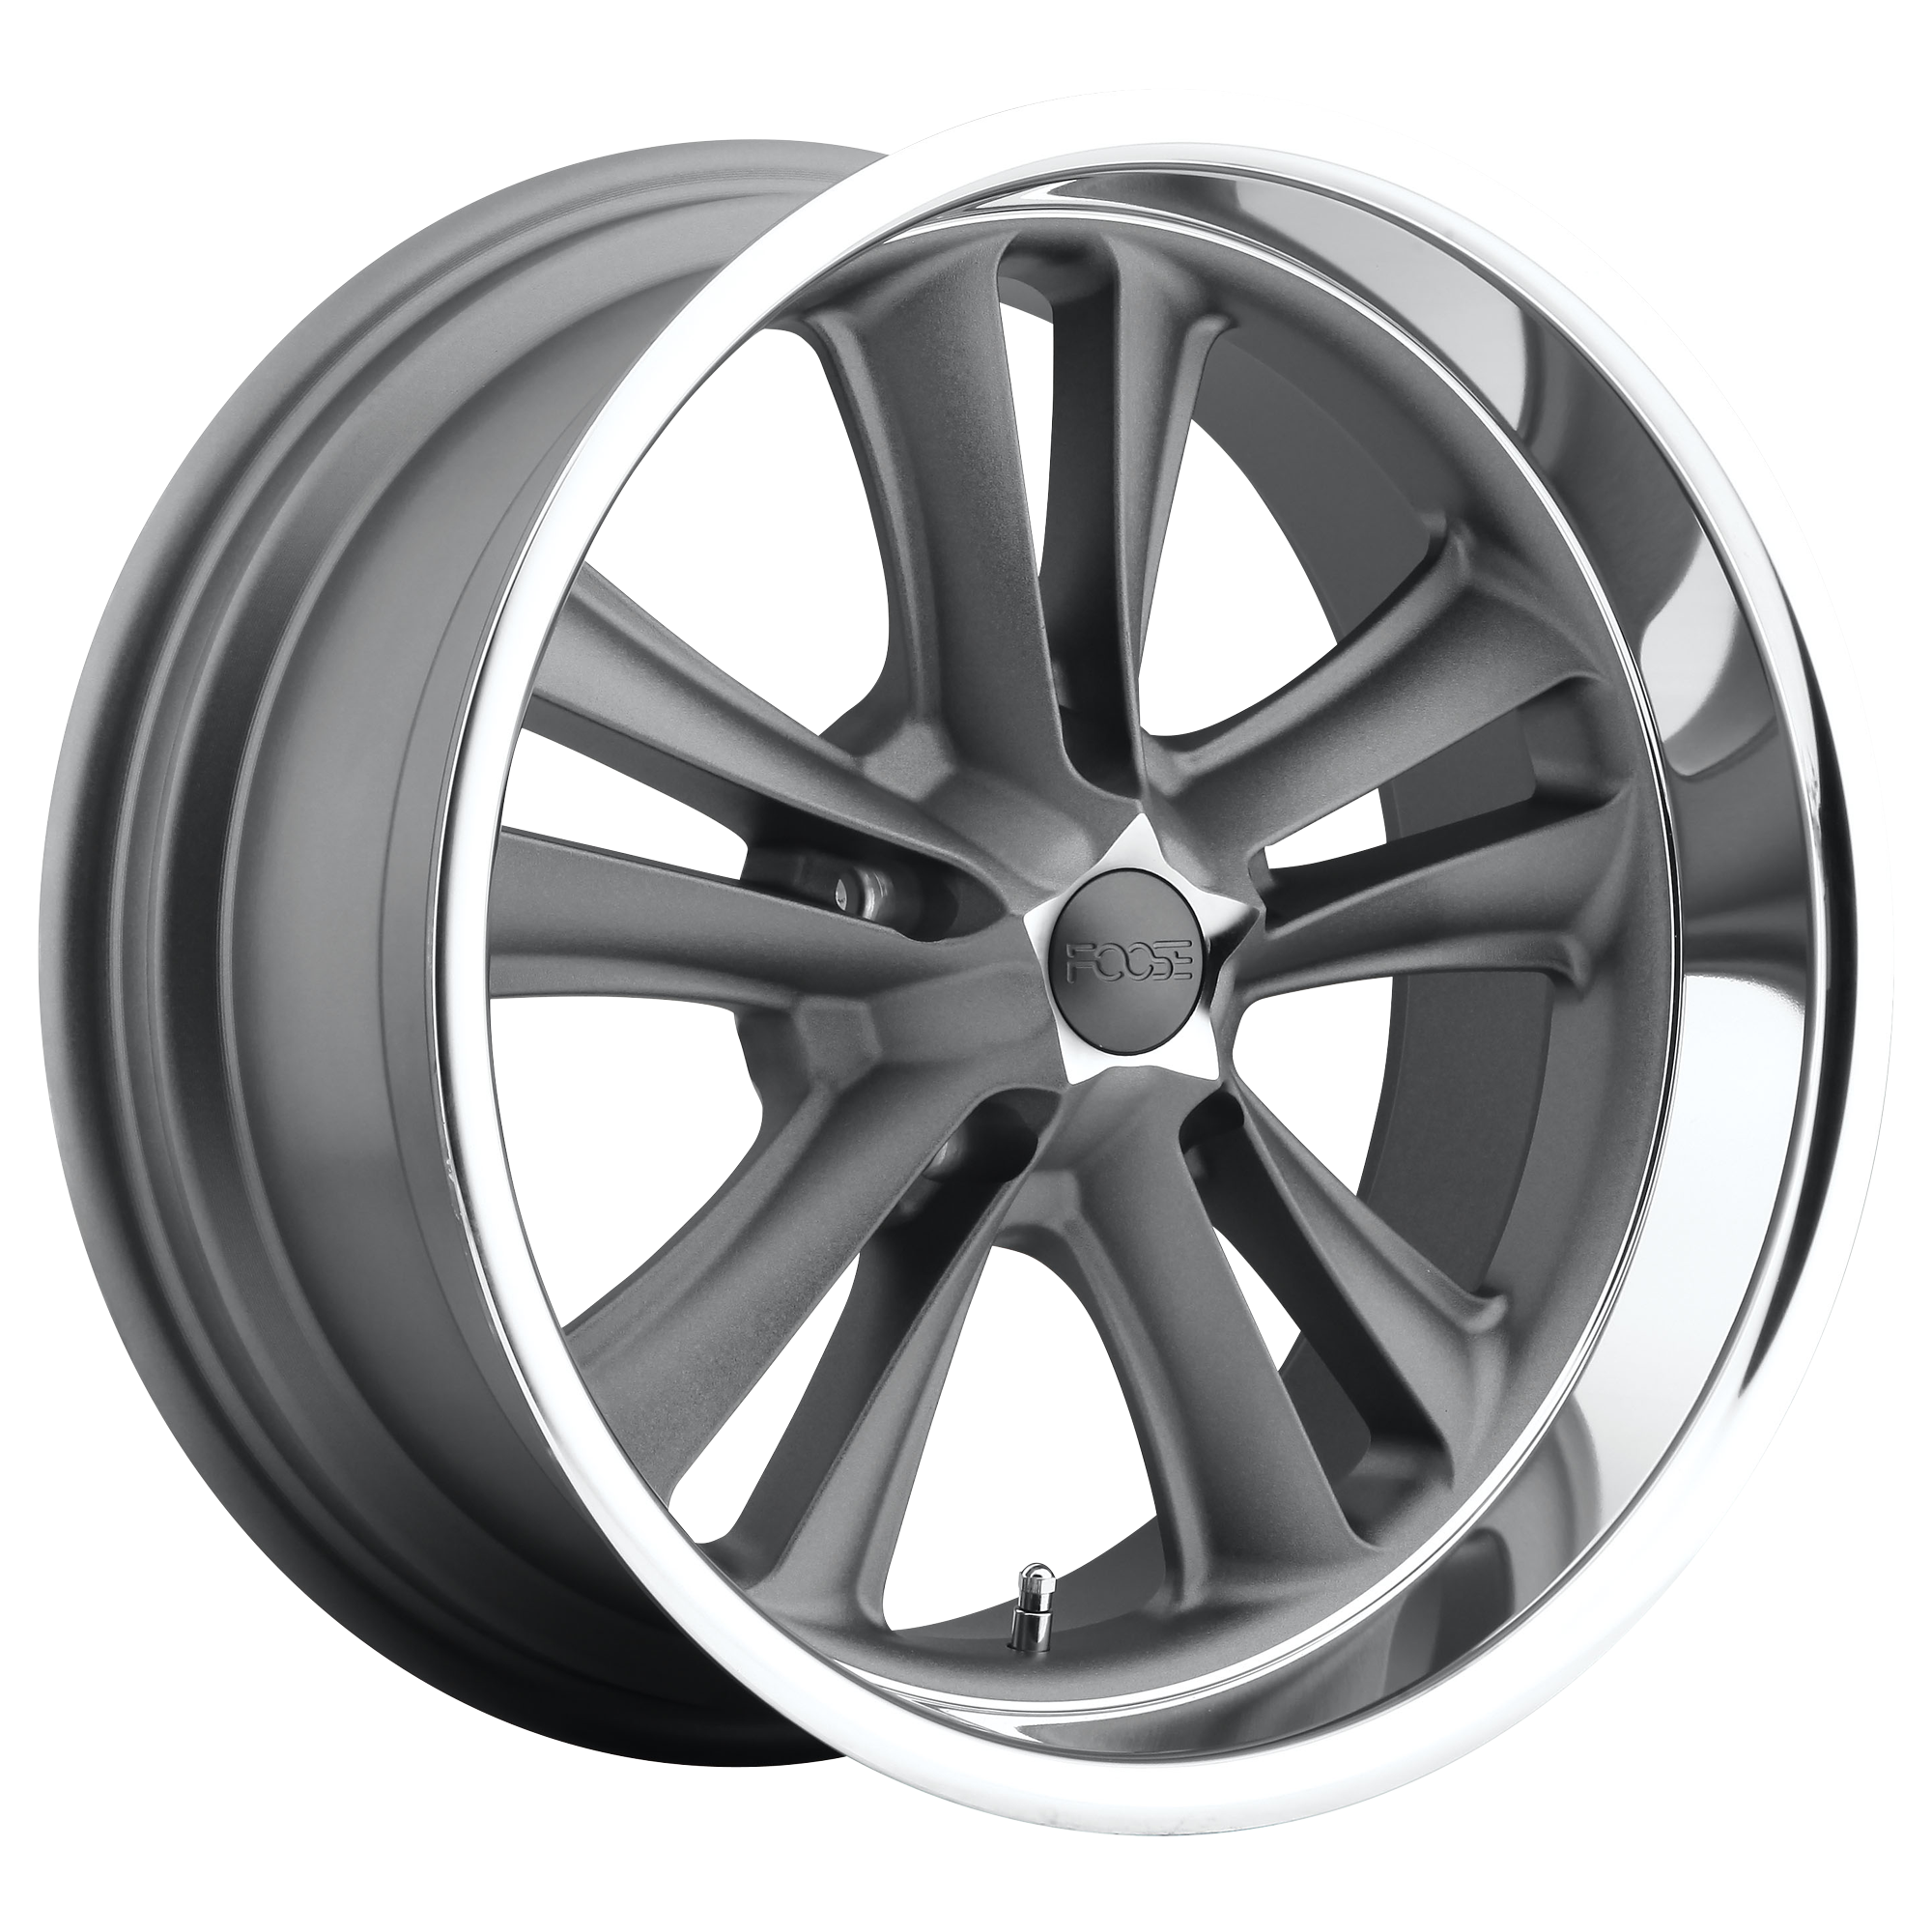 KNUCKLE 18x9.5 5x114.30 MATTE GUN METAL MACHINED (1 mm) - Tires and Engine Performance